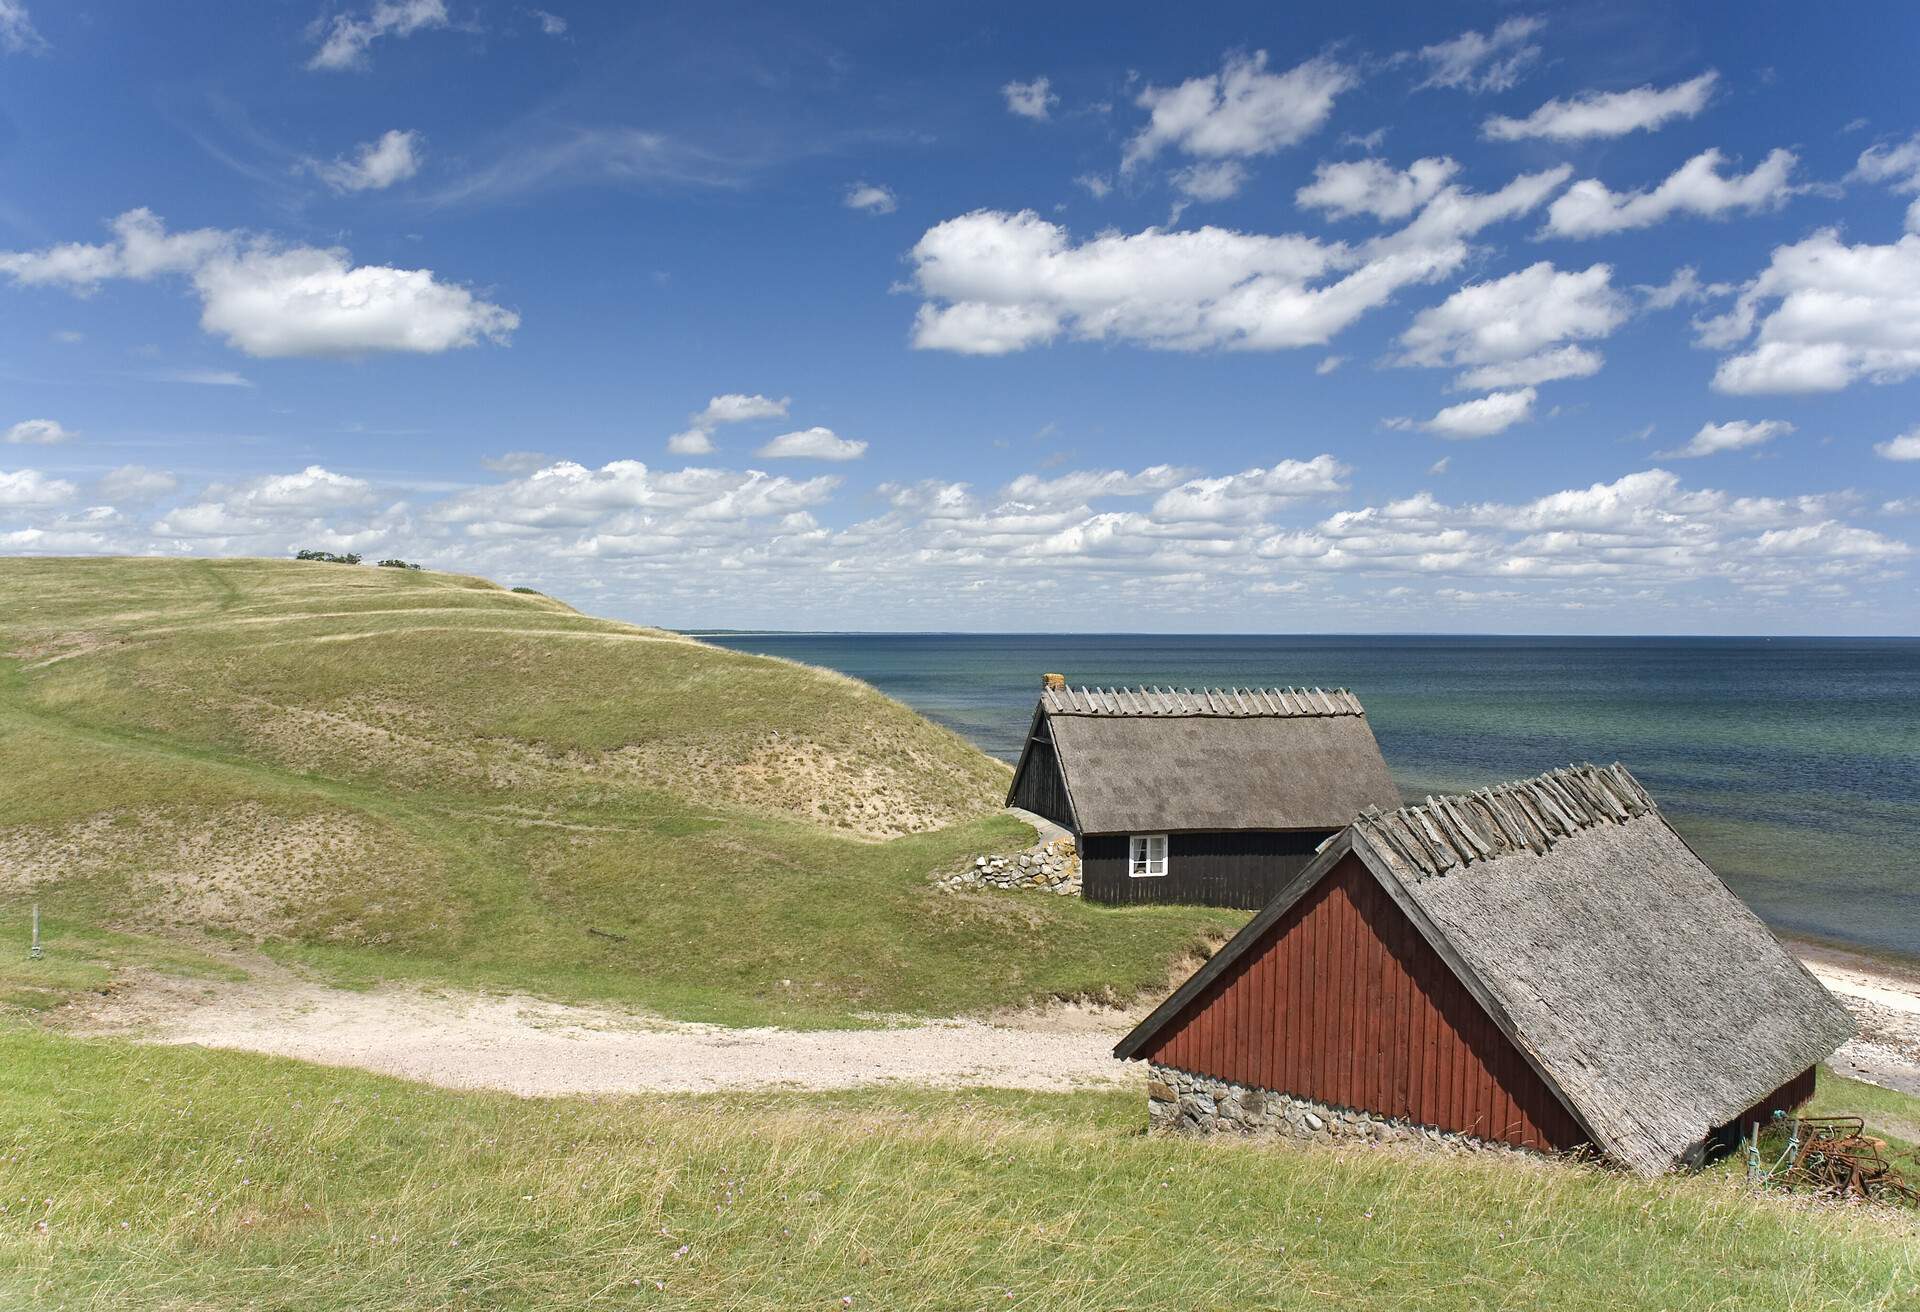 Two traditional small houses on a hill overlooking the sea in Osterlen, Sweden